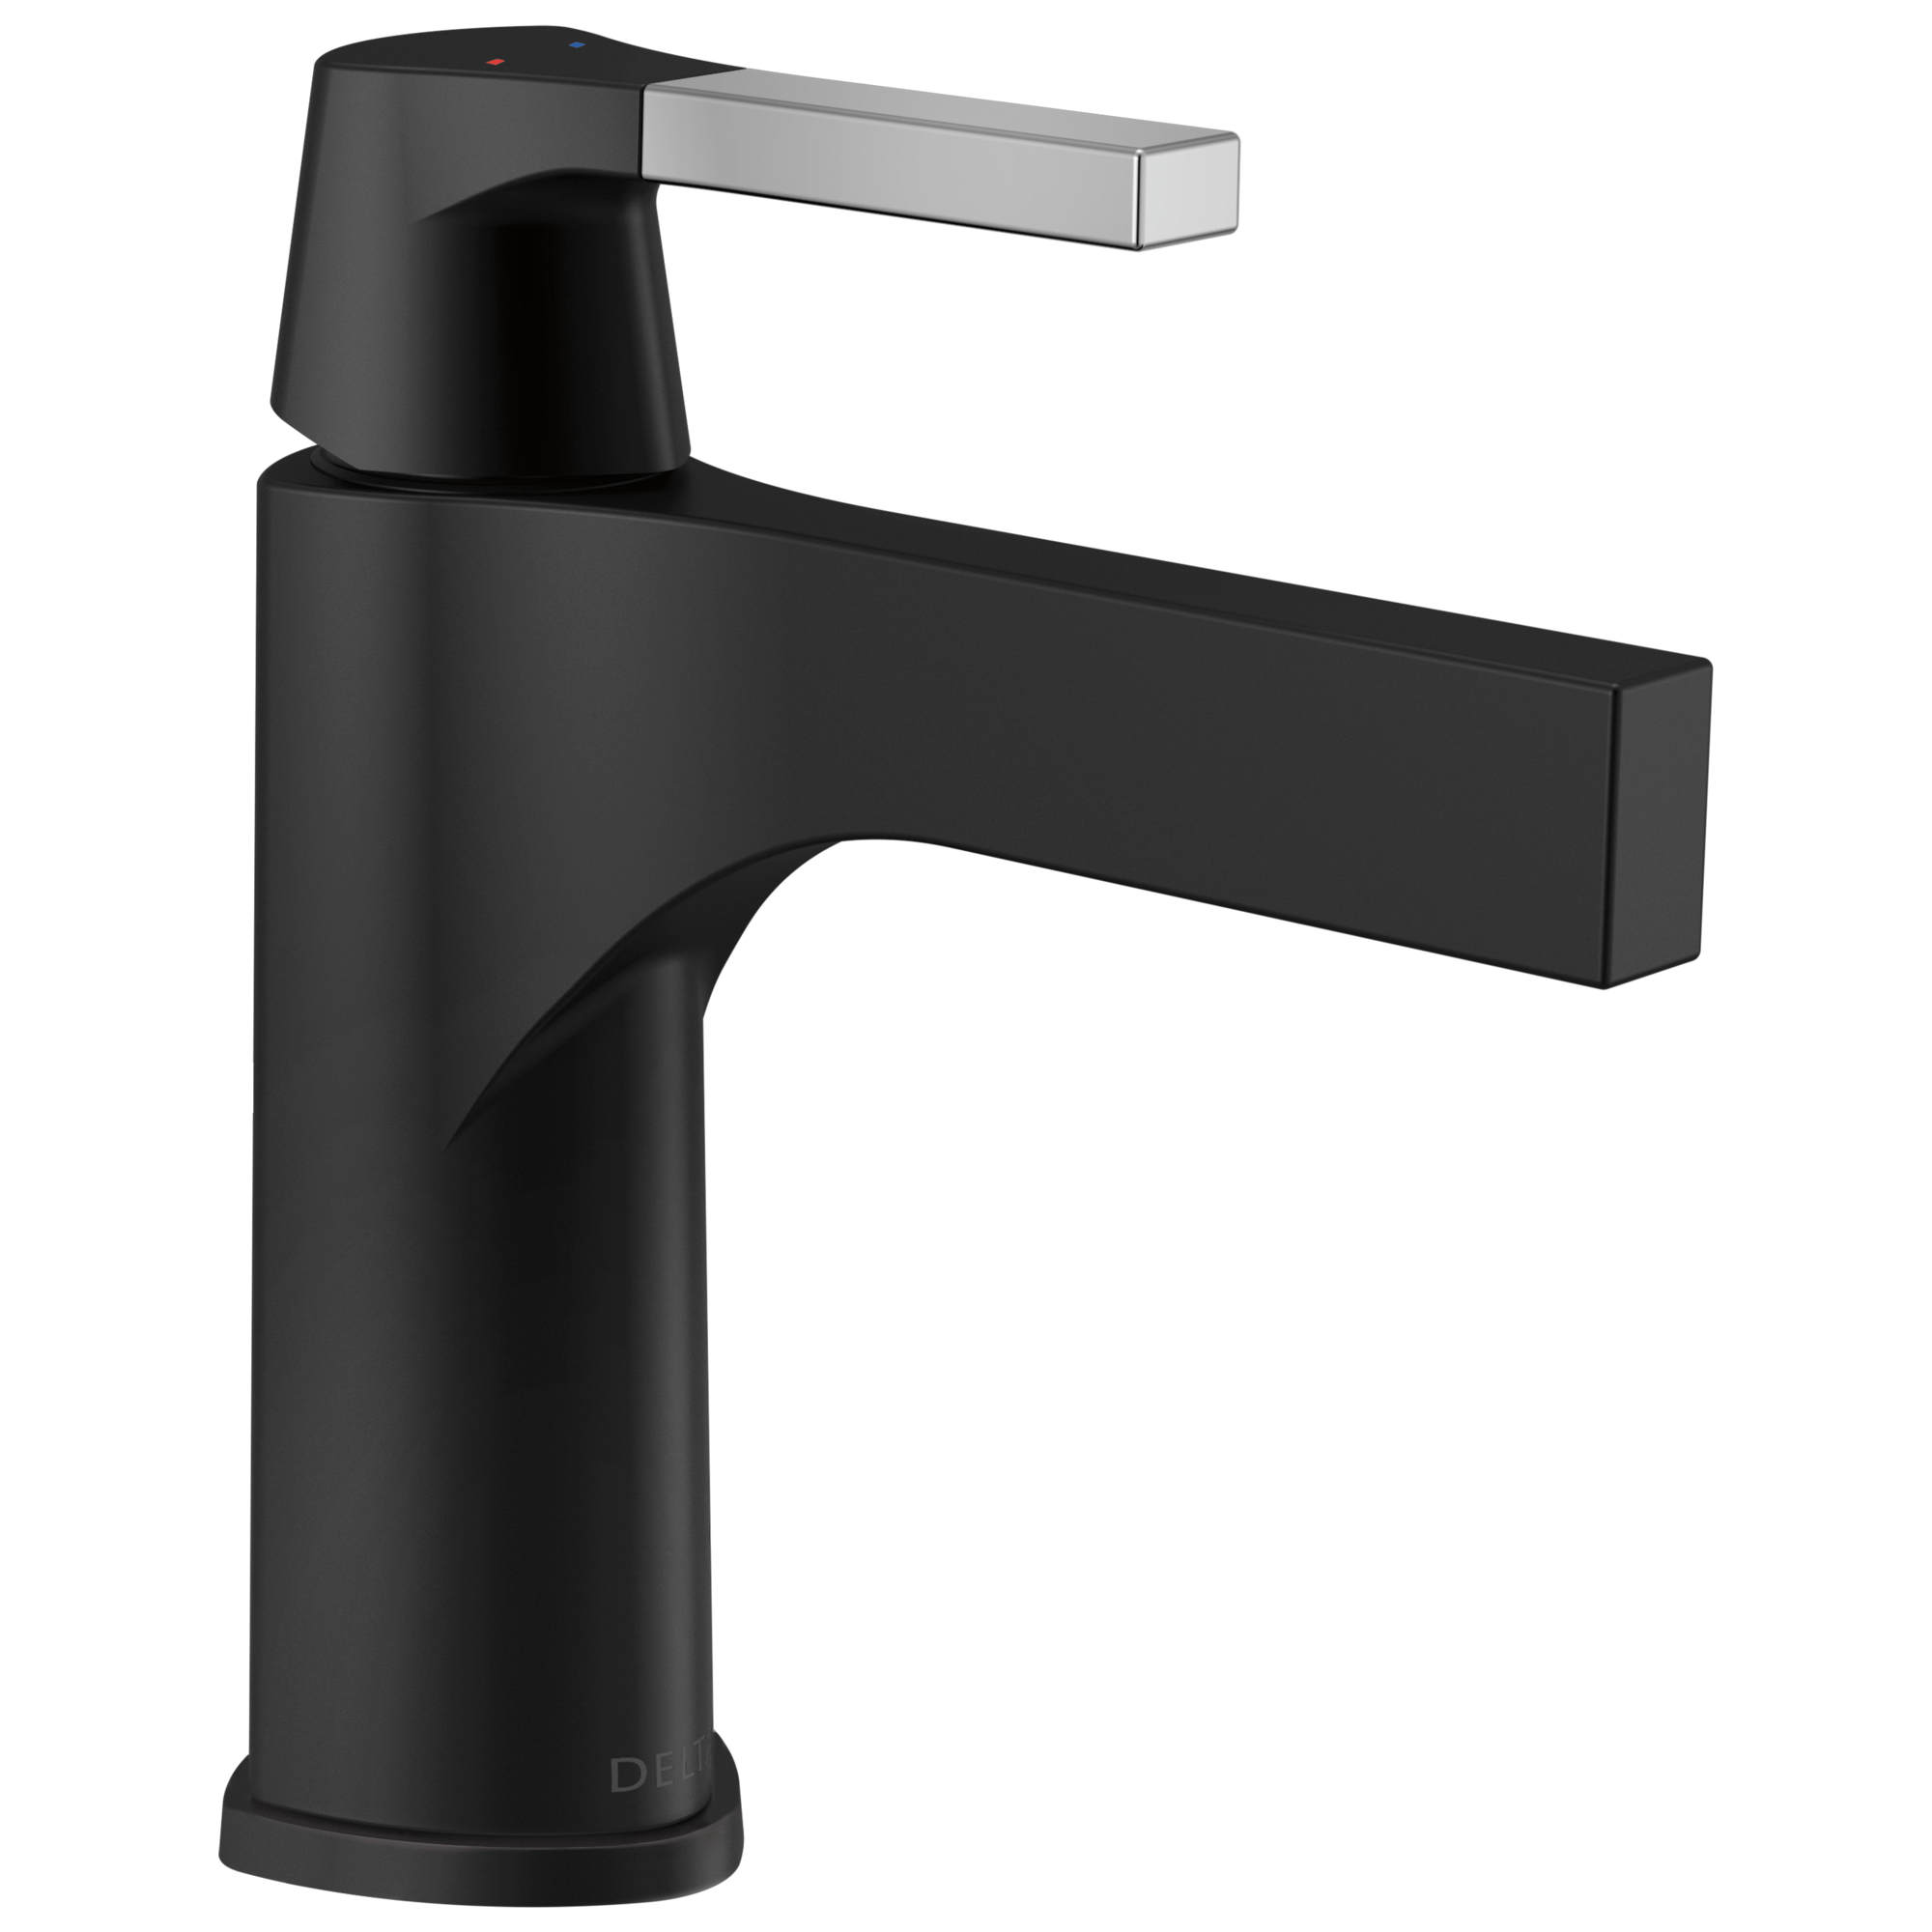 Delta Zura Single Handle Bathroom Faucet with Drain in Chrome and Black